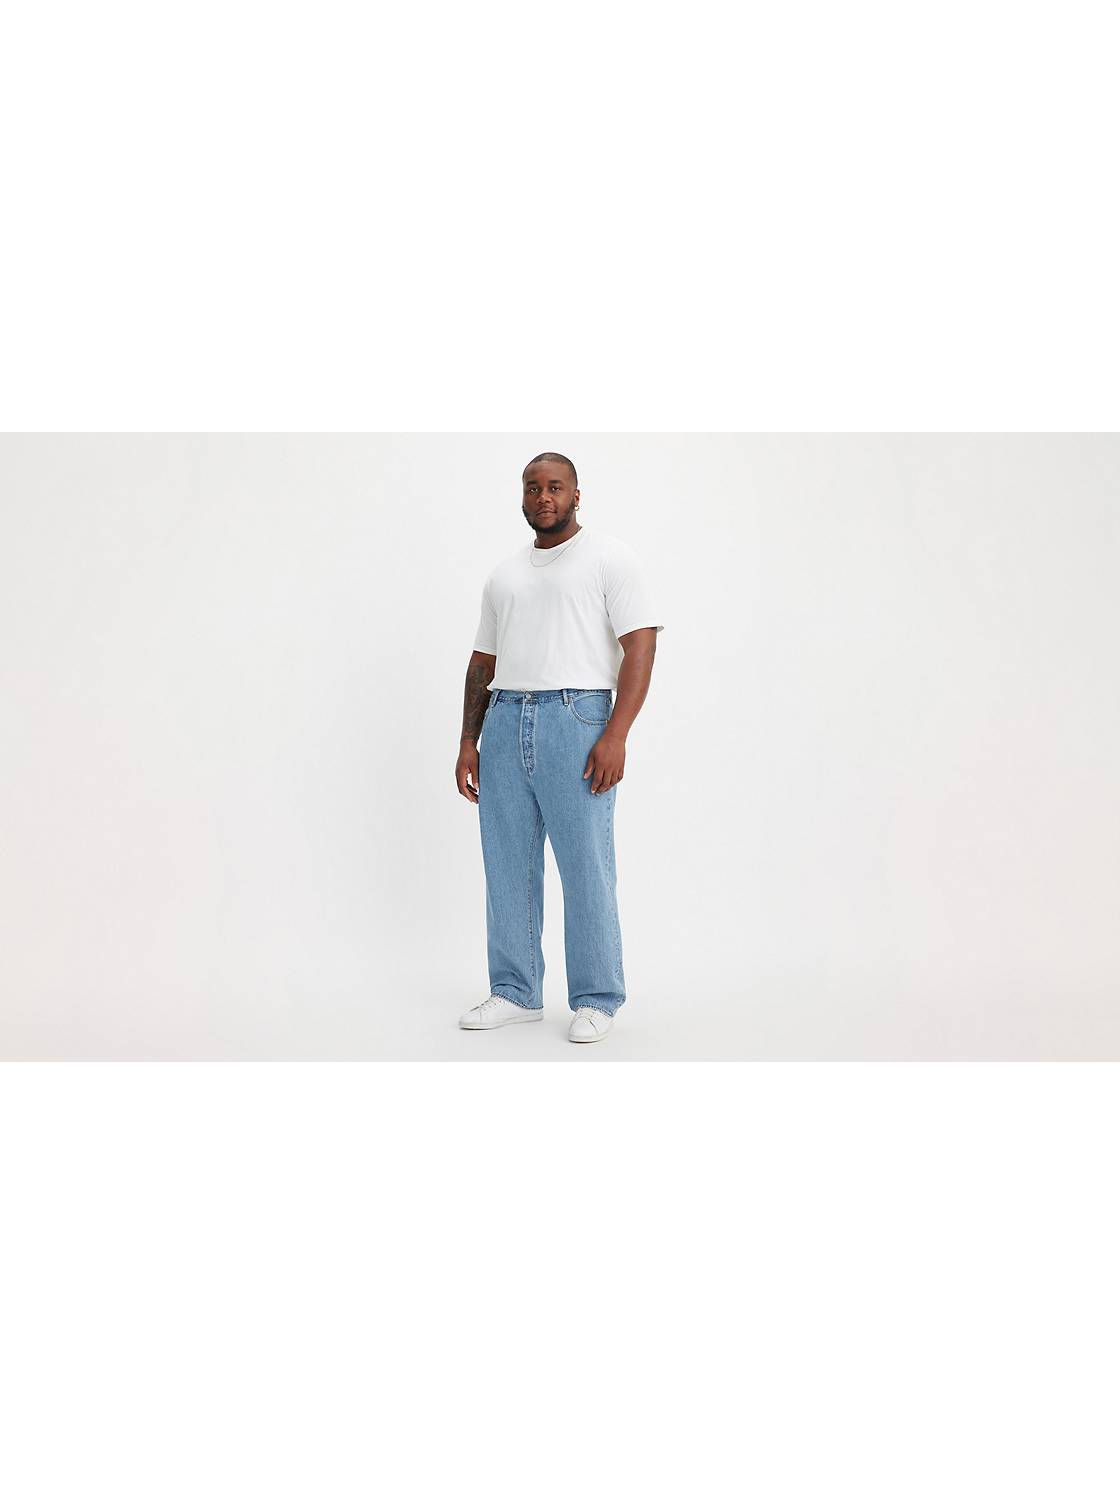 Big and Tall Light Wash Jeans for Men